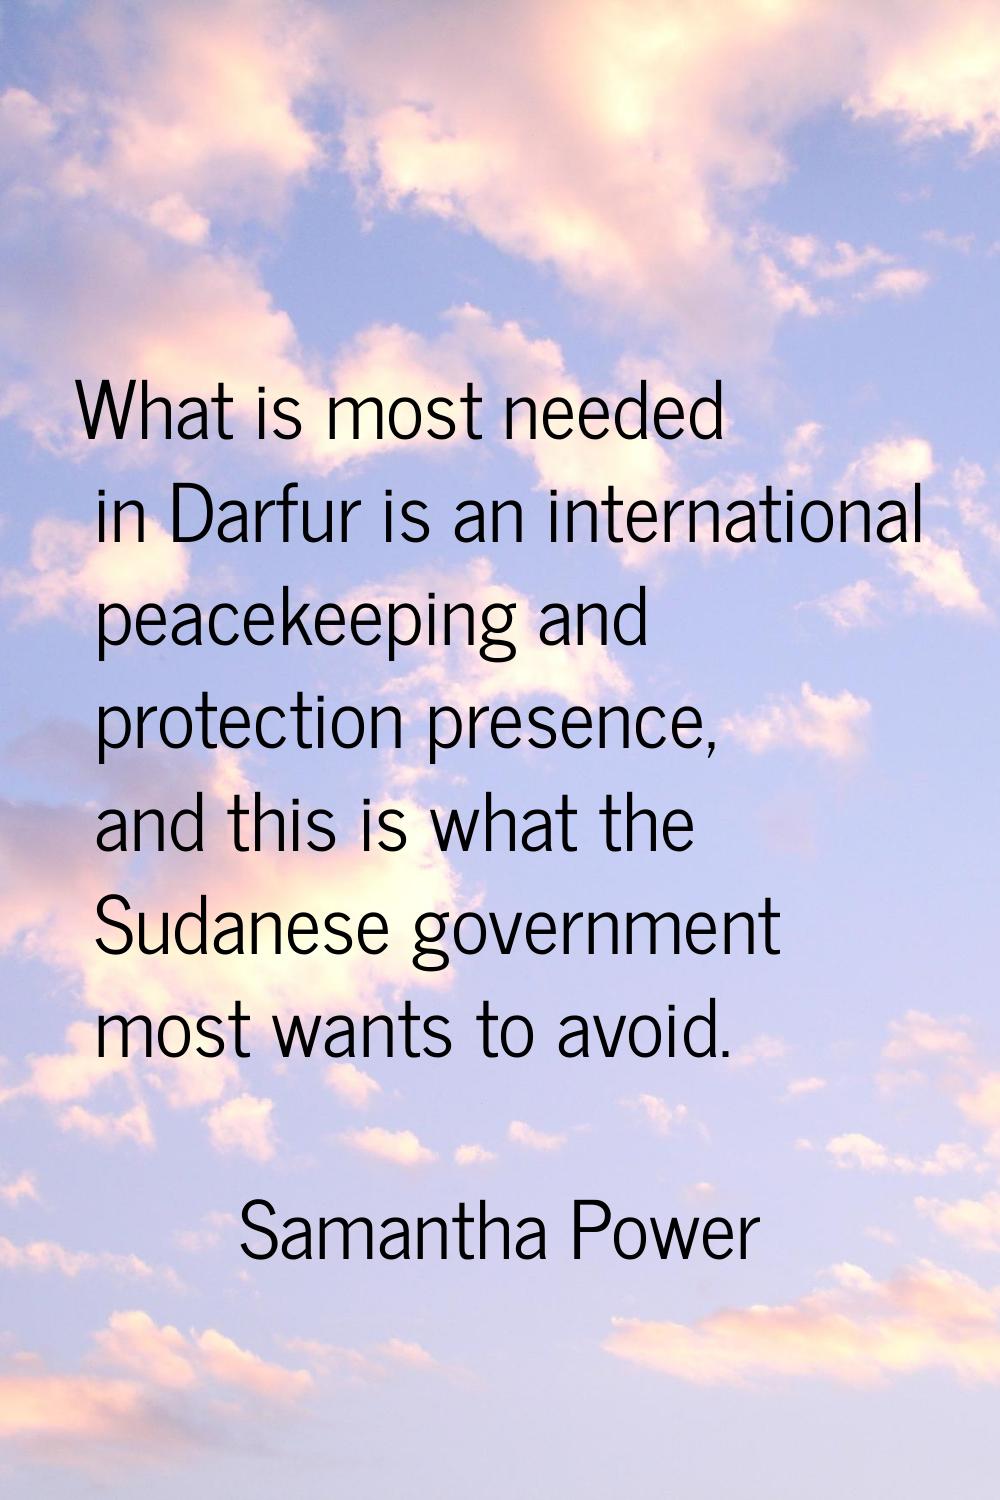 What is most needed in Darfur is an international peacekeeping and protection presence, and this is